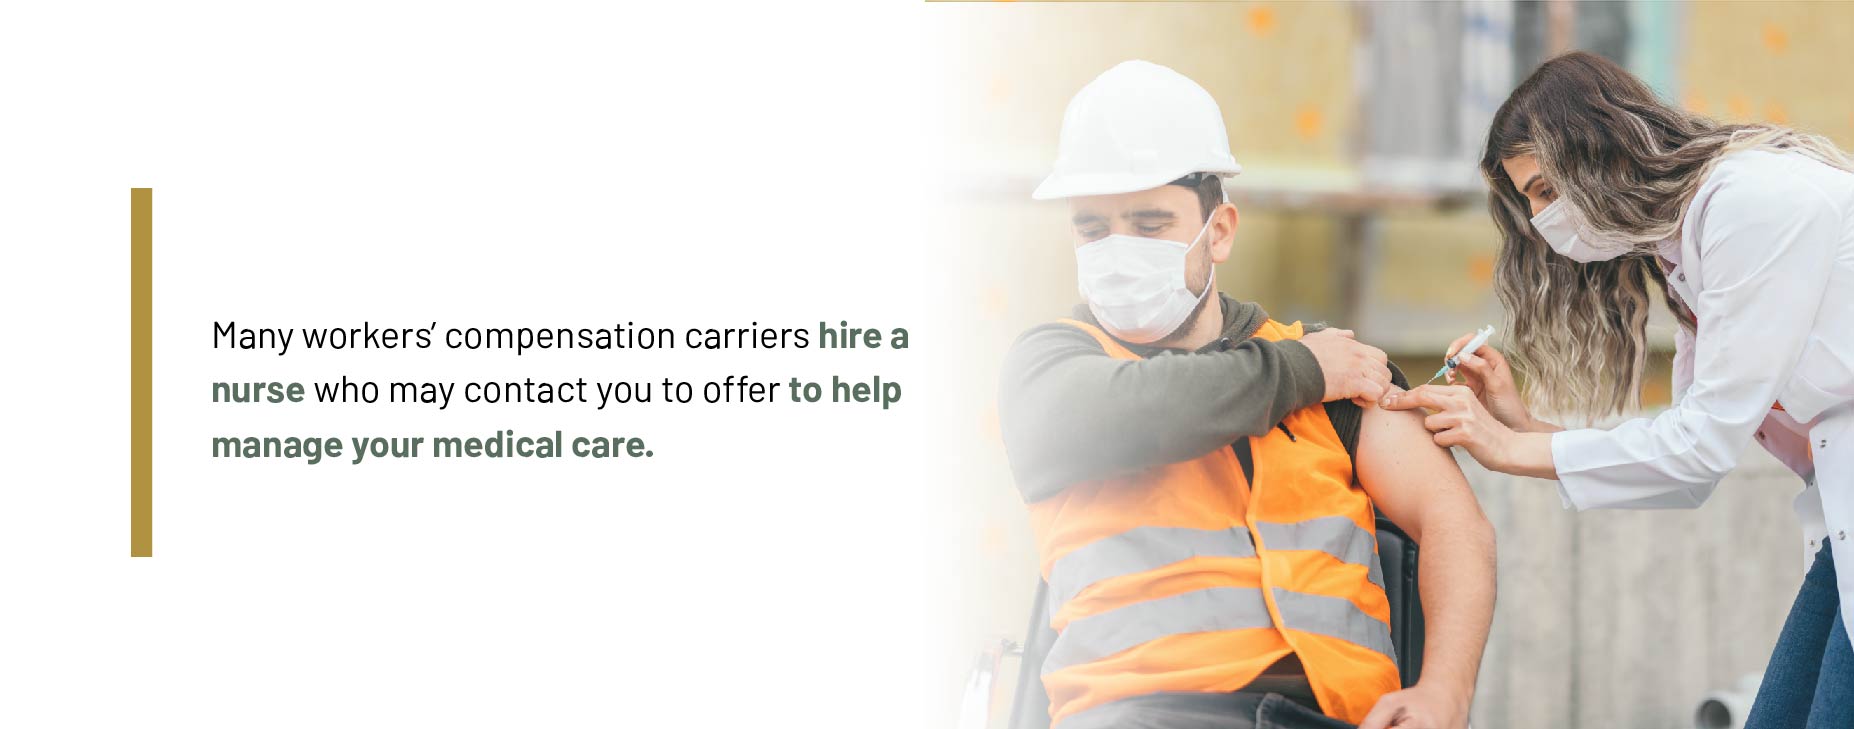 many workers compensation carriers hire medical professionals